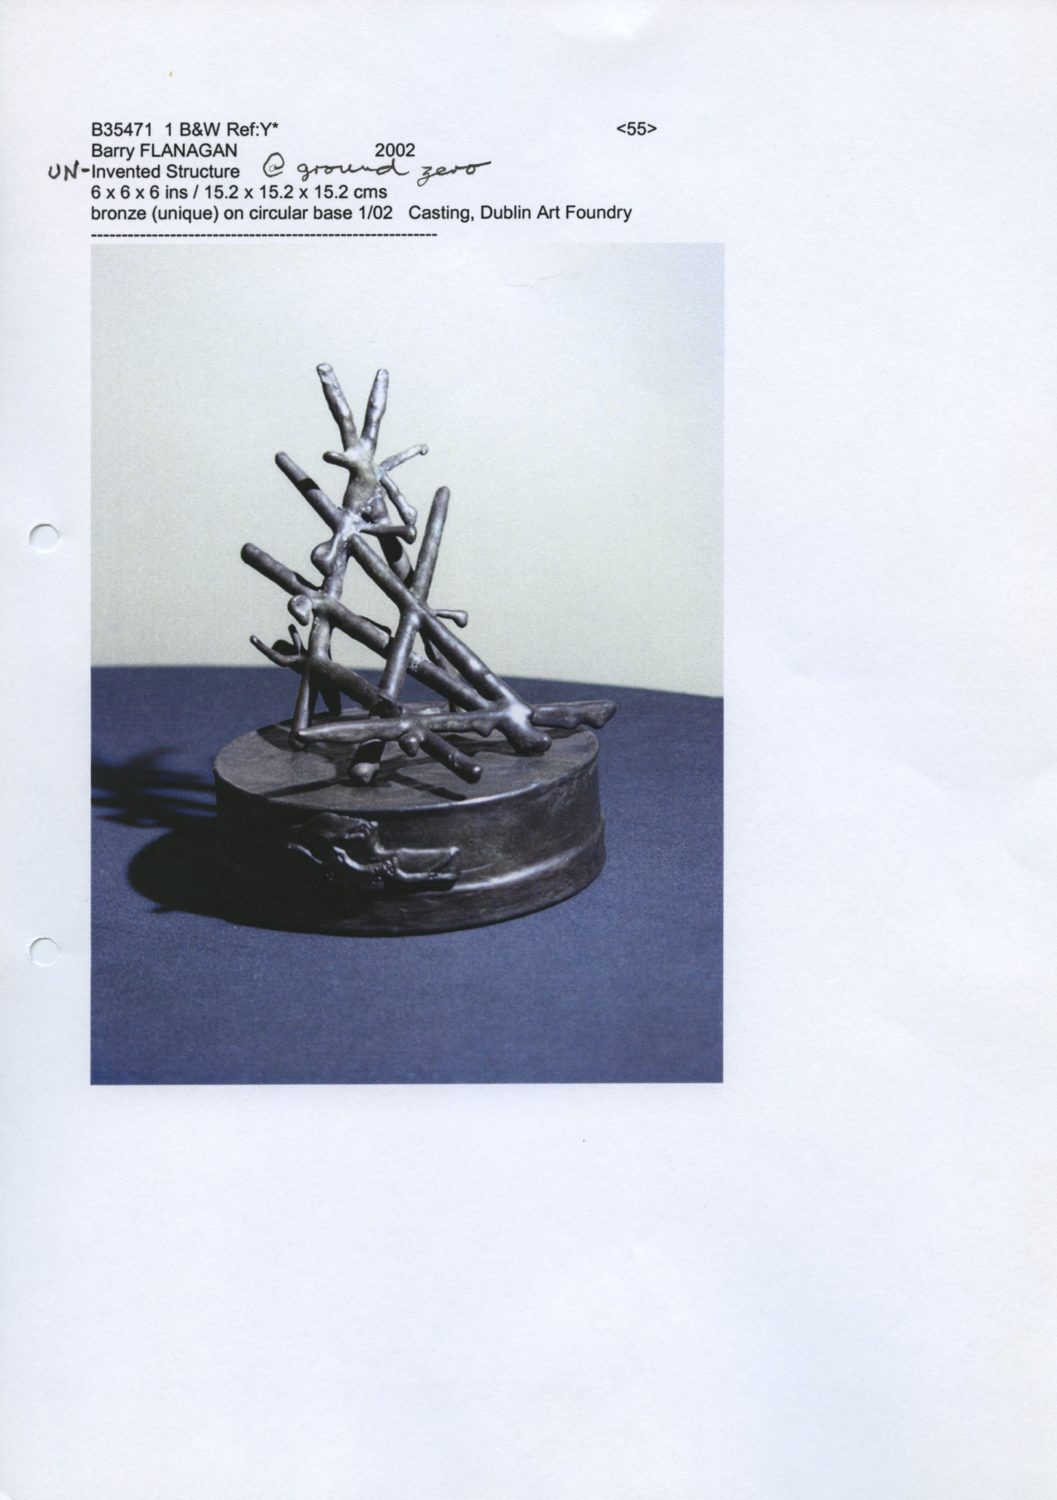 ‘Linear Sculptures in Bronze and Stone Carvings’, Waddington Galleries, London, UK (2004)